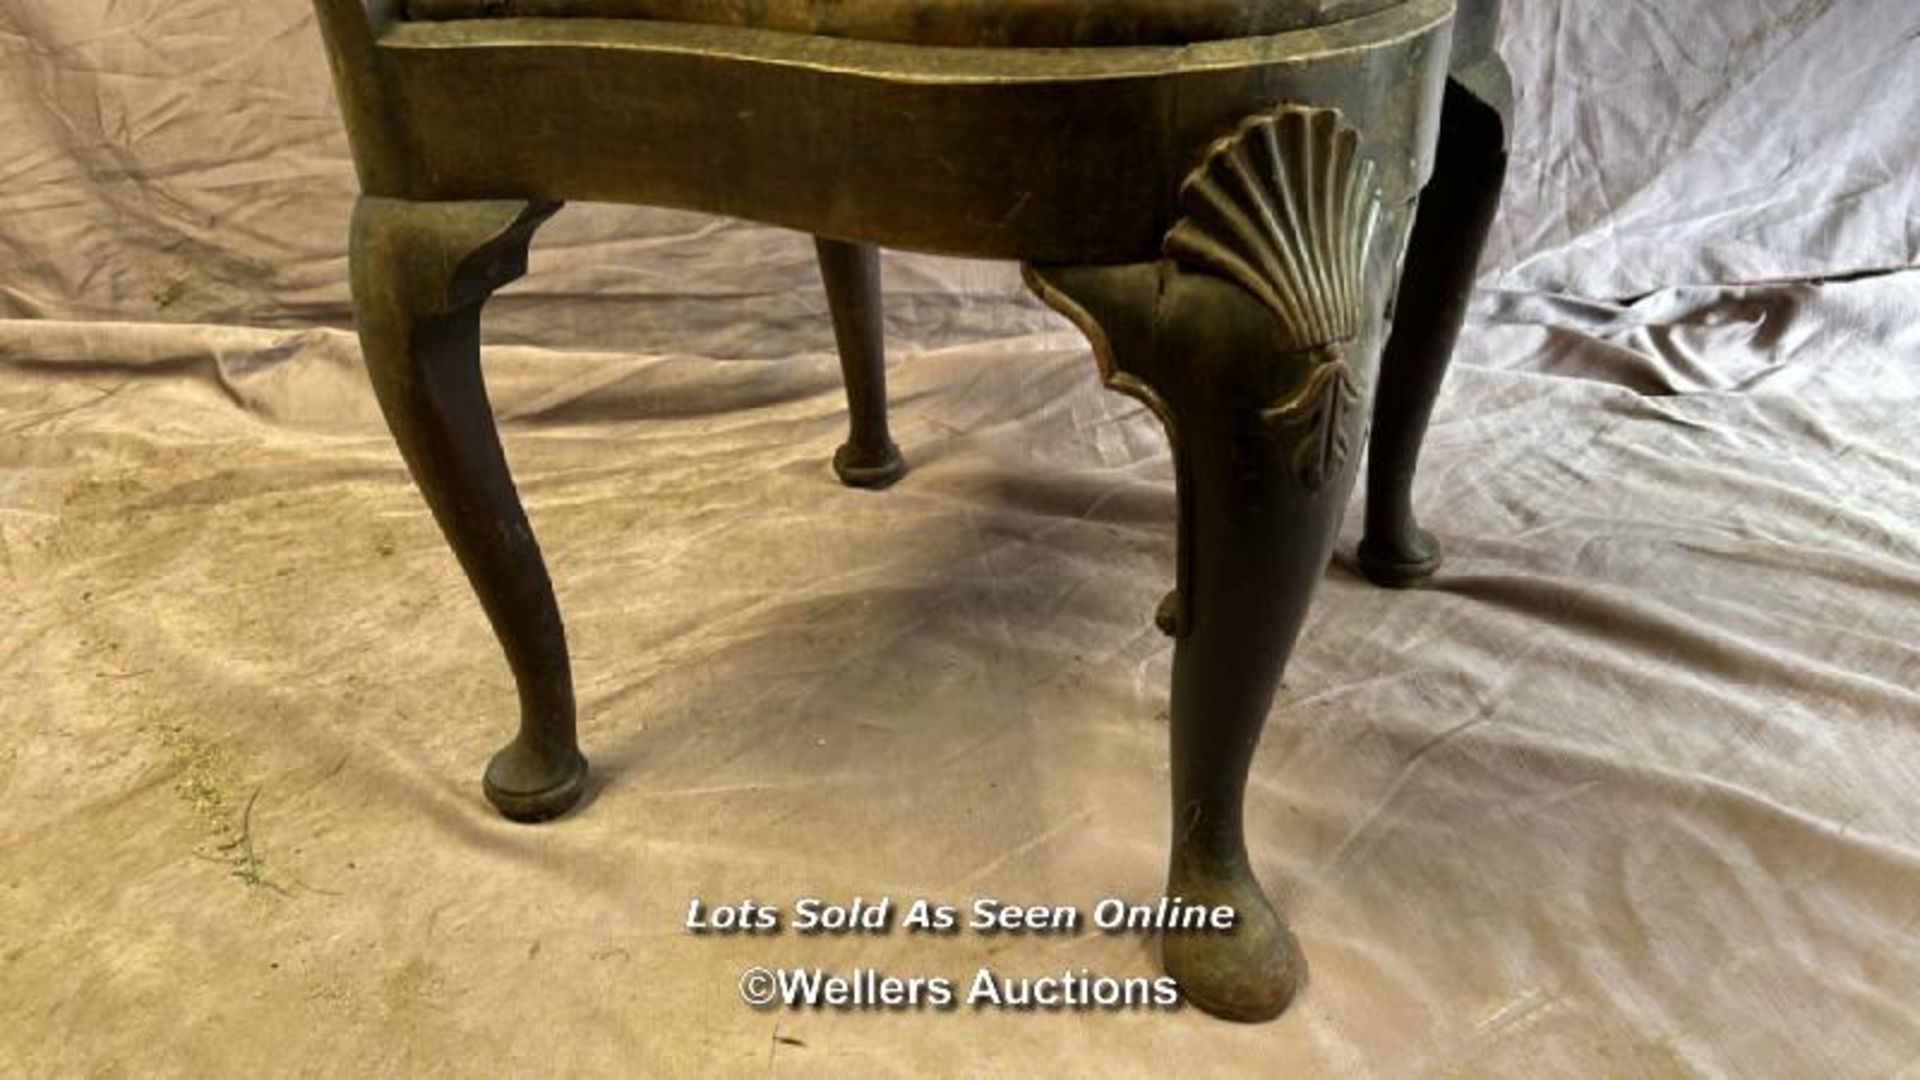 18TH CENTURY CORNER CHAIR, WITH SHELL MOTIF ON CABRIOLE LEGS, ORIGINAL LEATHER PADDED SEAT (IN - Image 4 of 5